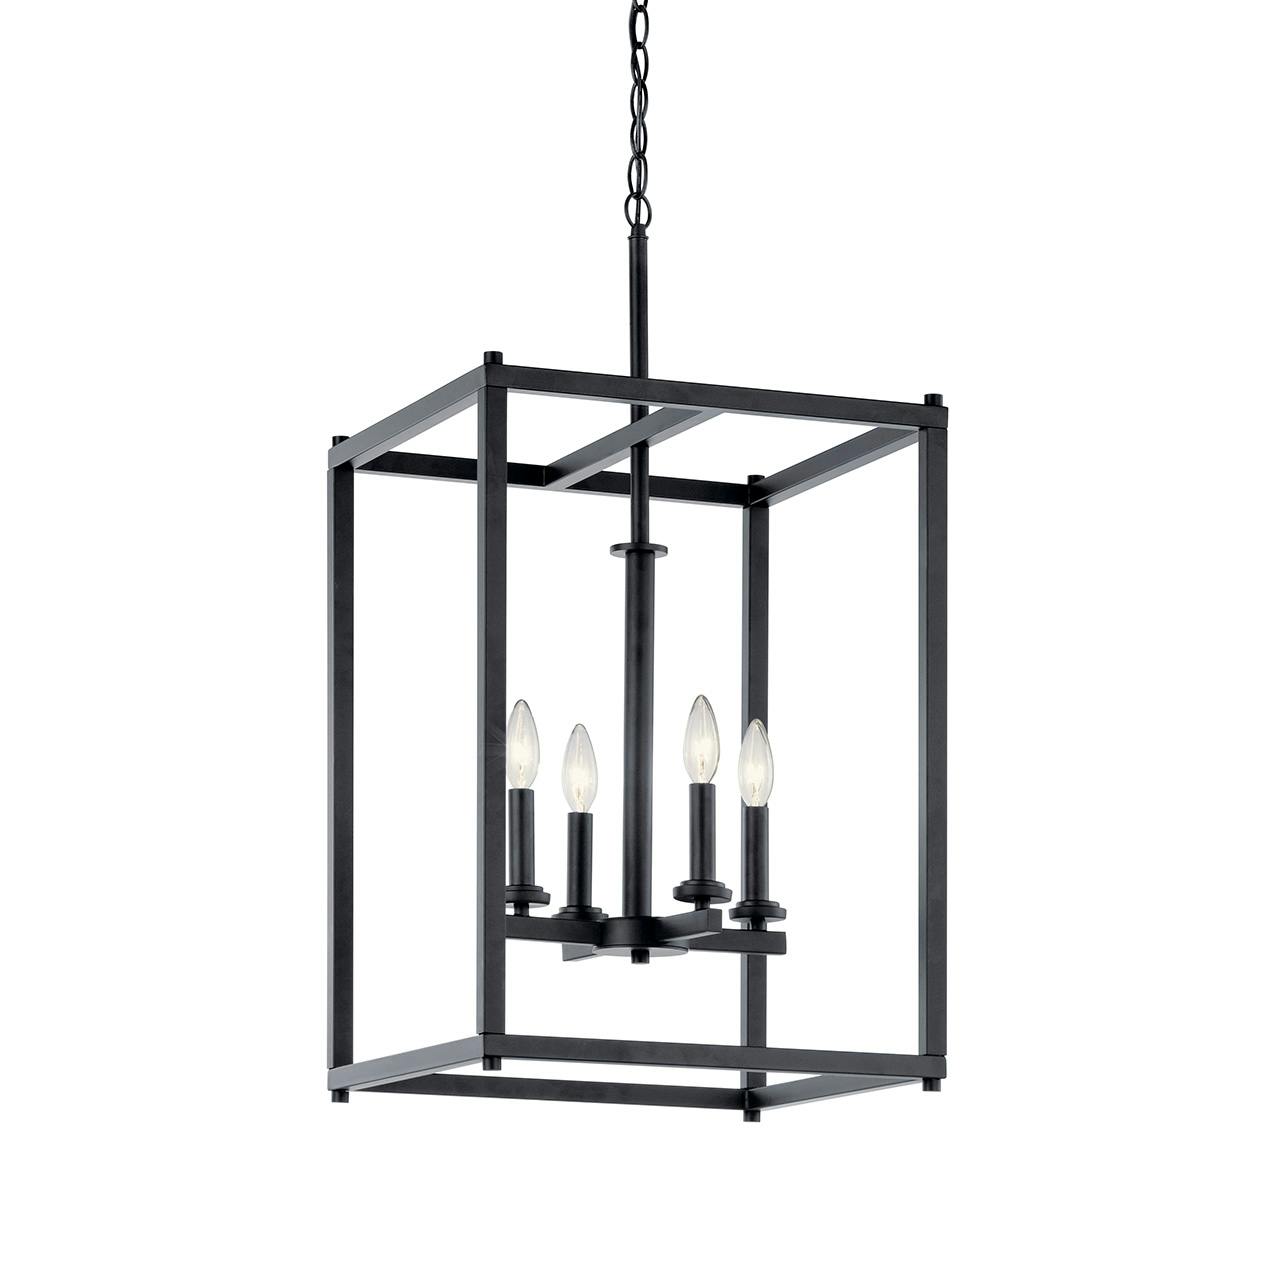 Crosby 4 Light Foyer Pendant Black without the canopy on a white background